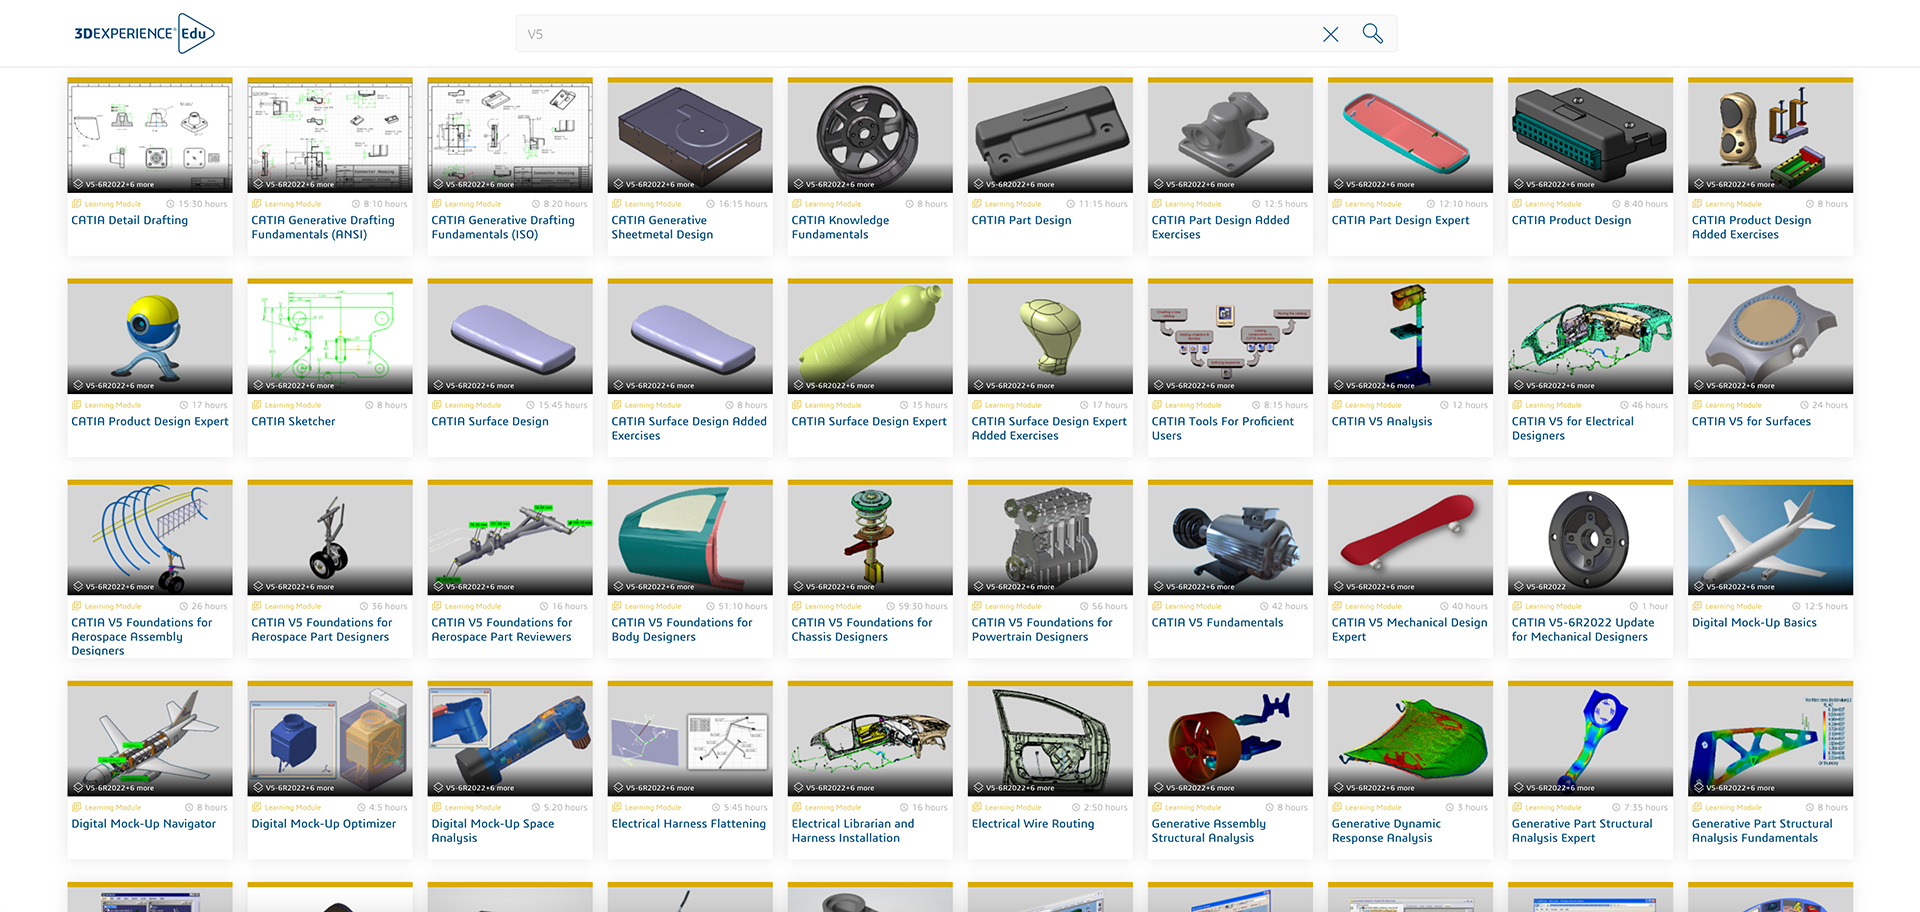 CATIA V5 Learning and Support Resources Available 